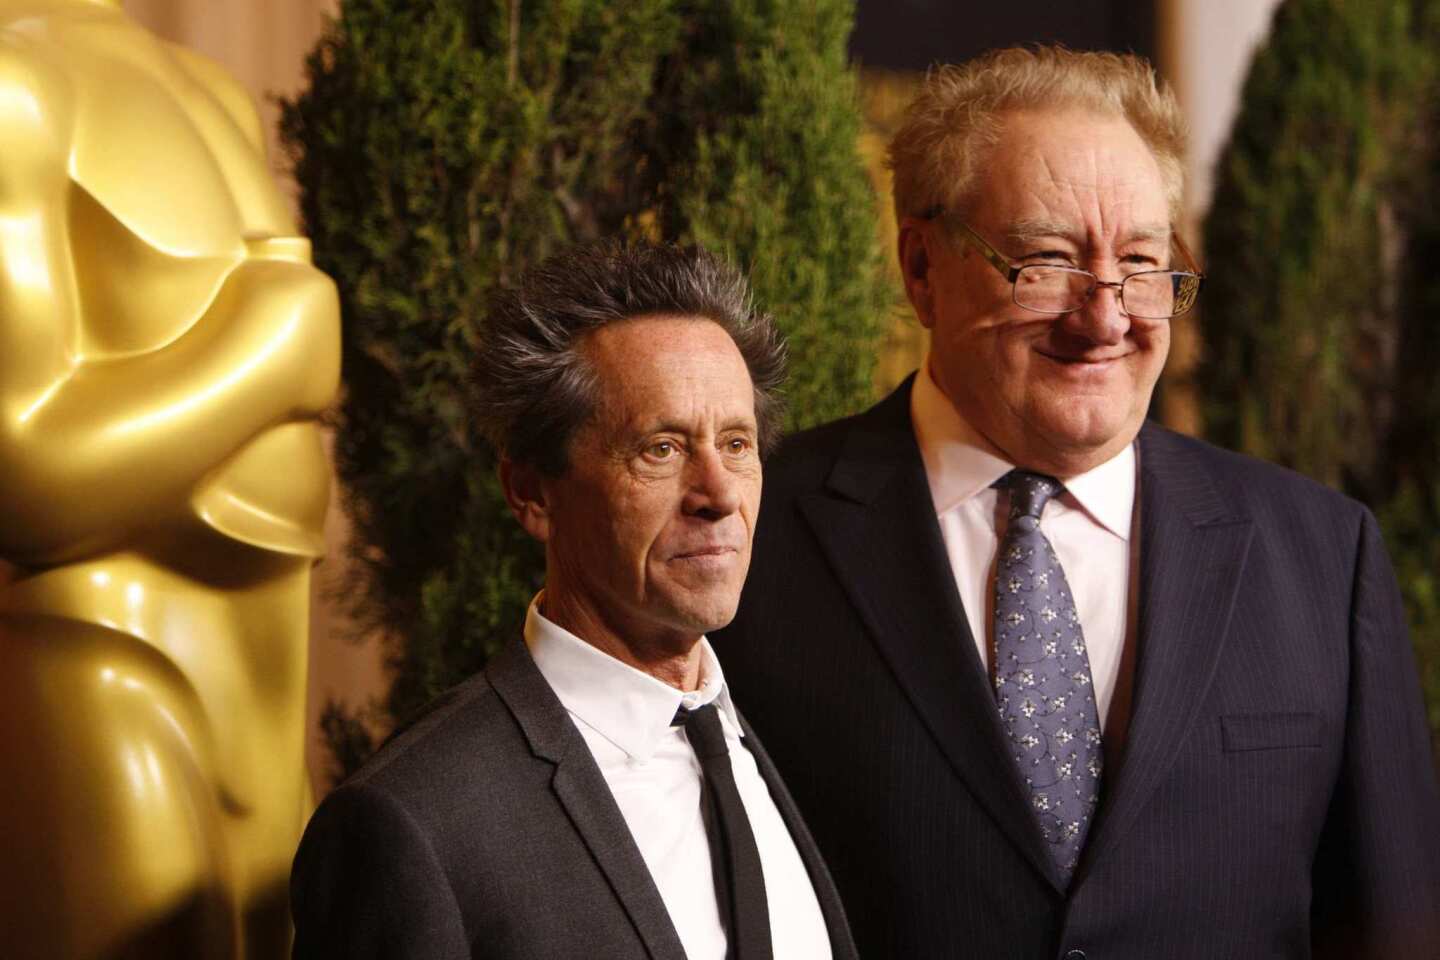 Brian Grazer, left, one of the producers of The 84th Academy Awards.